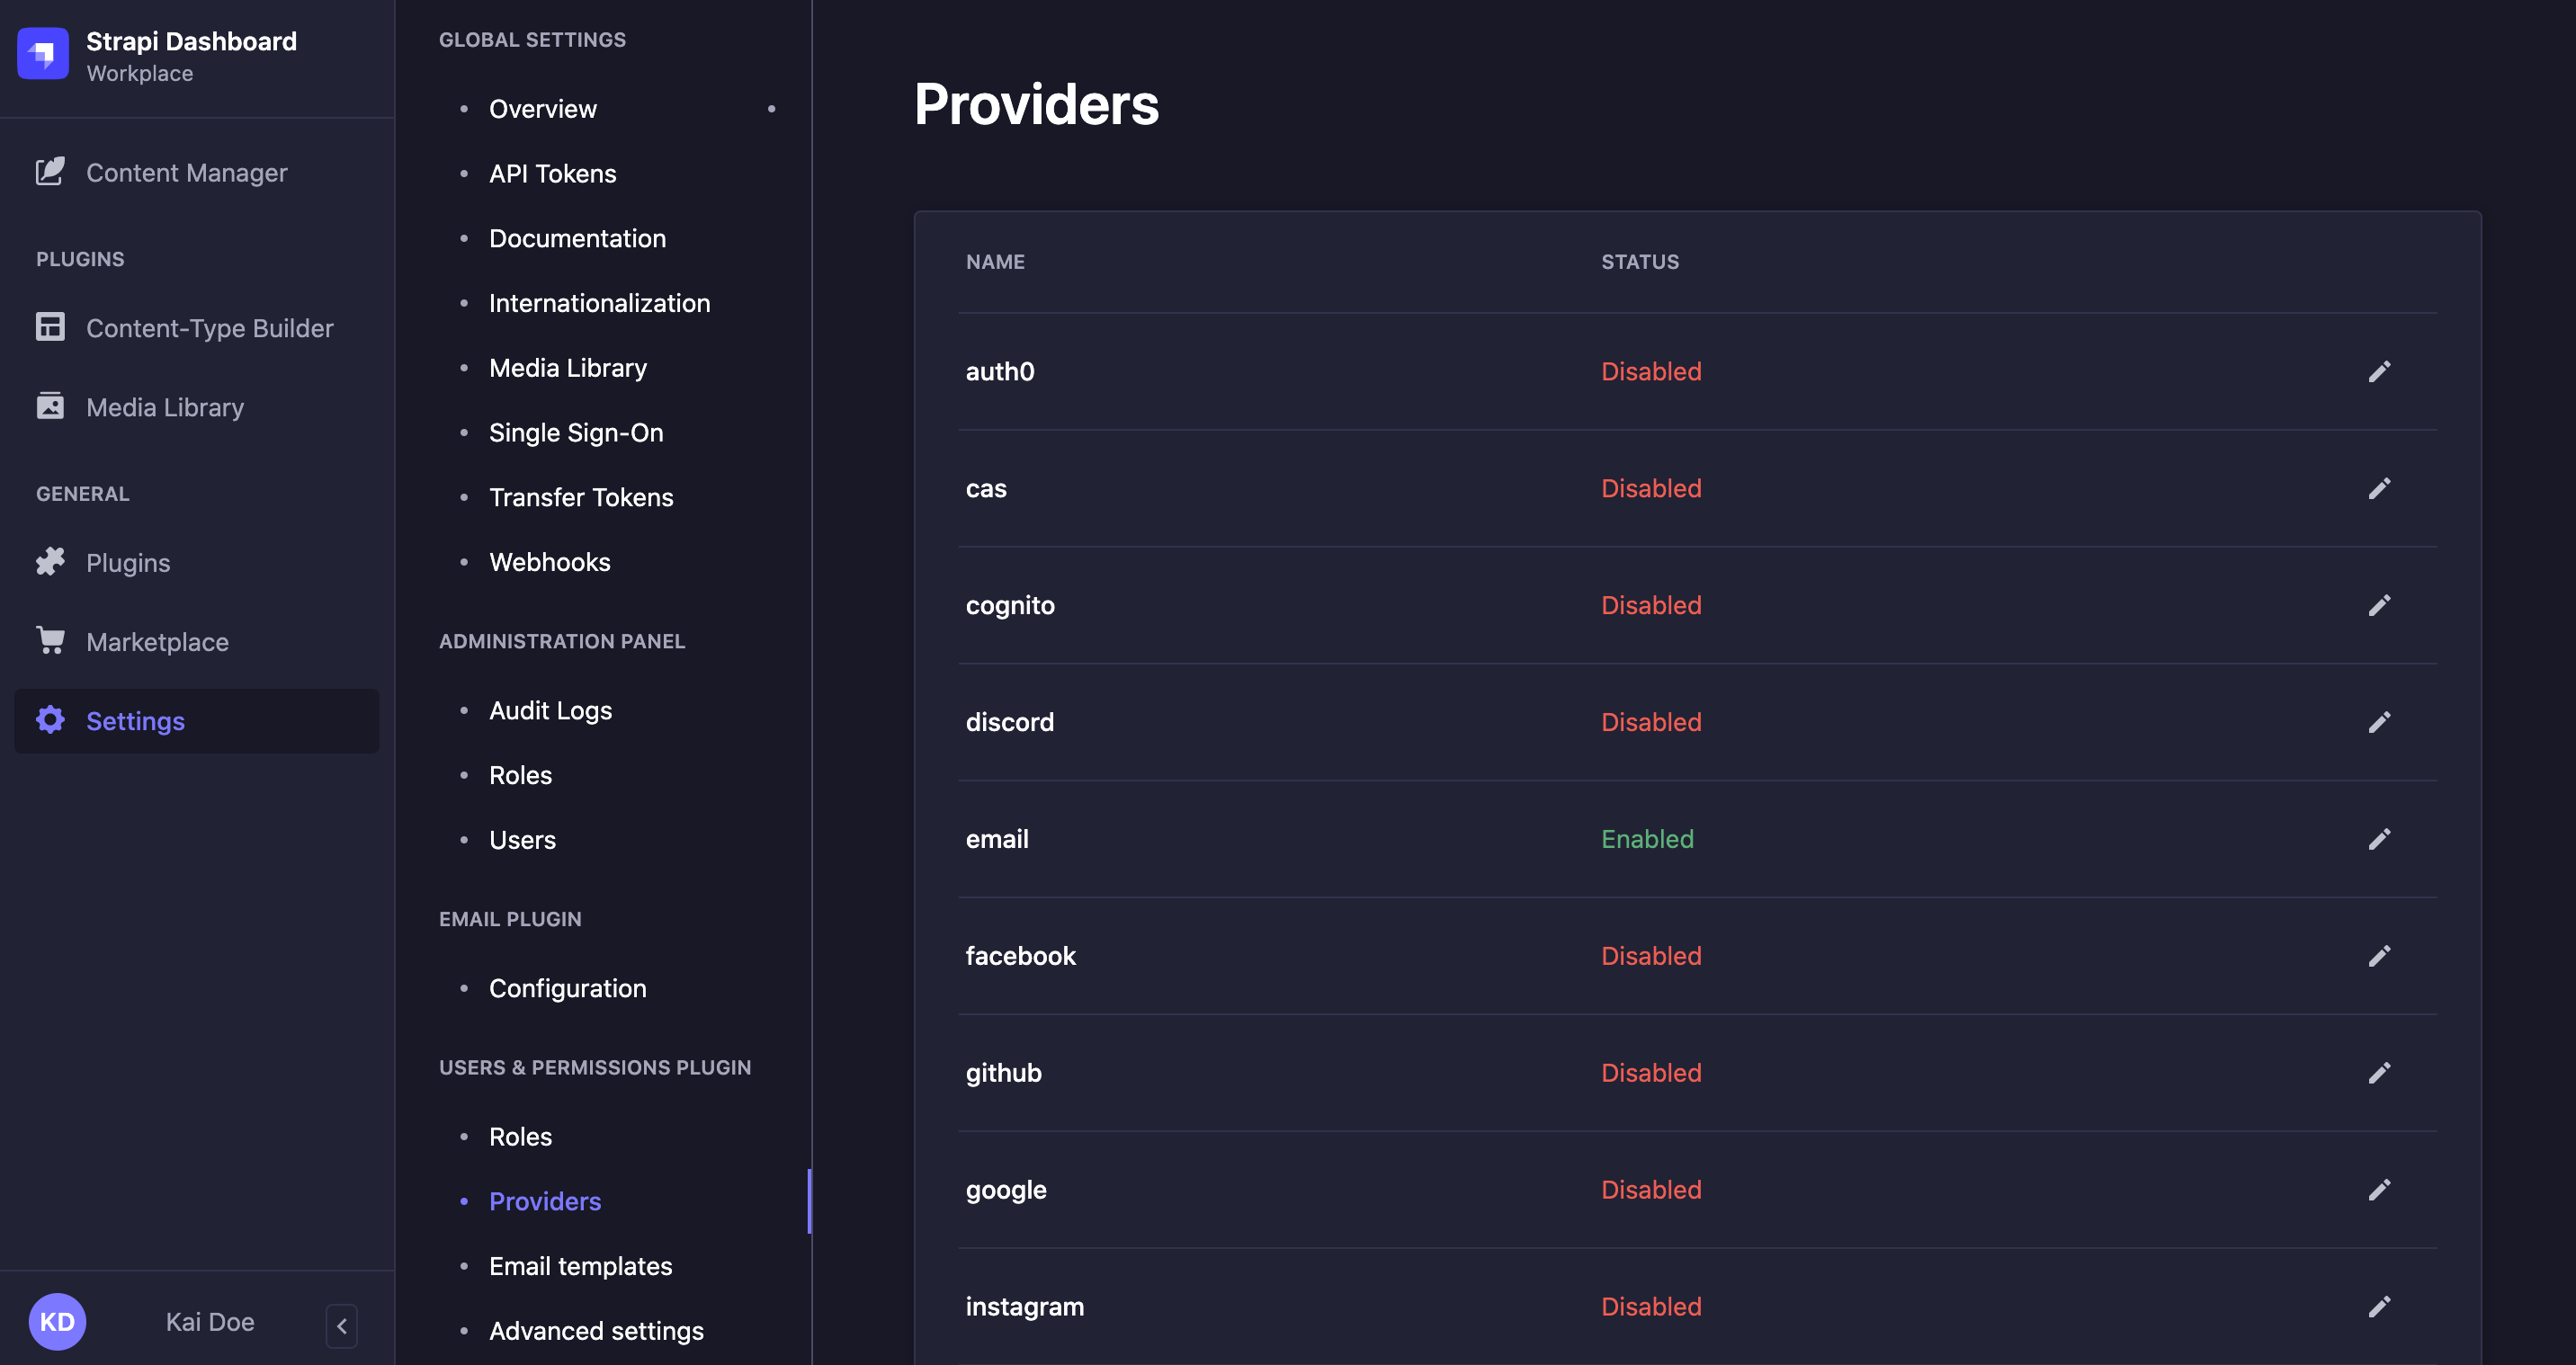 Providers interface